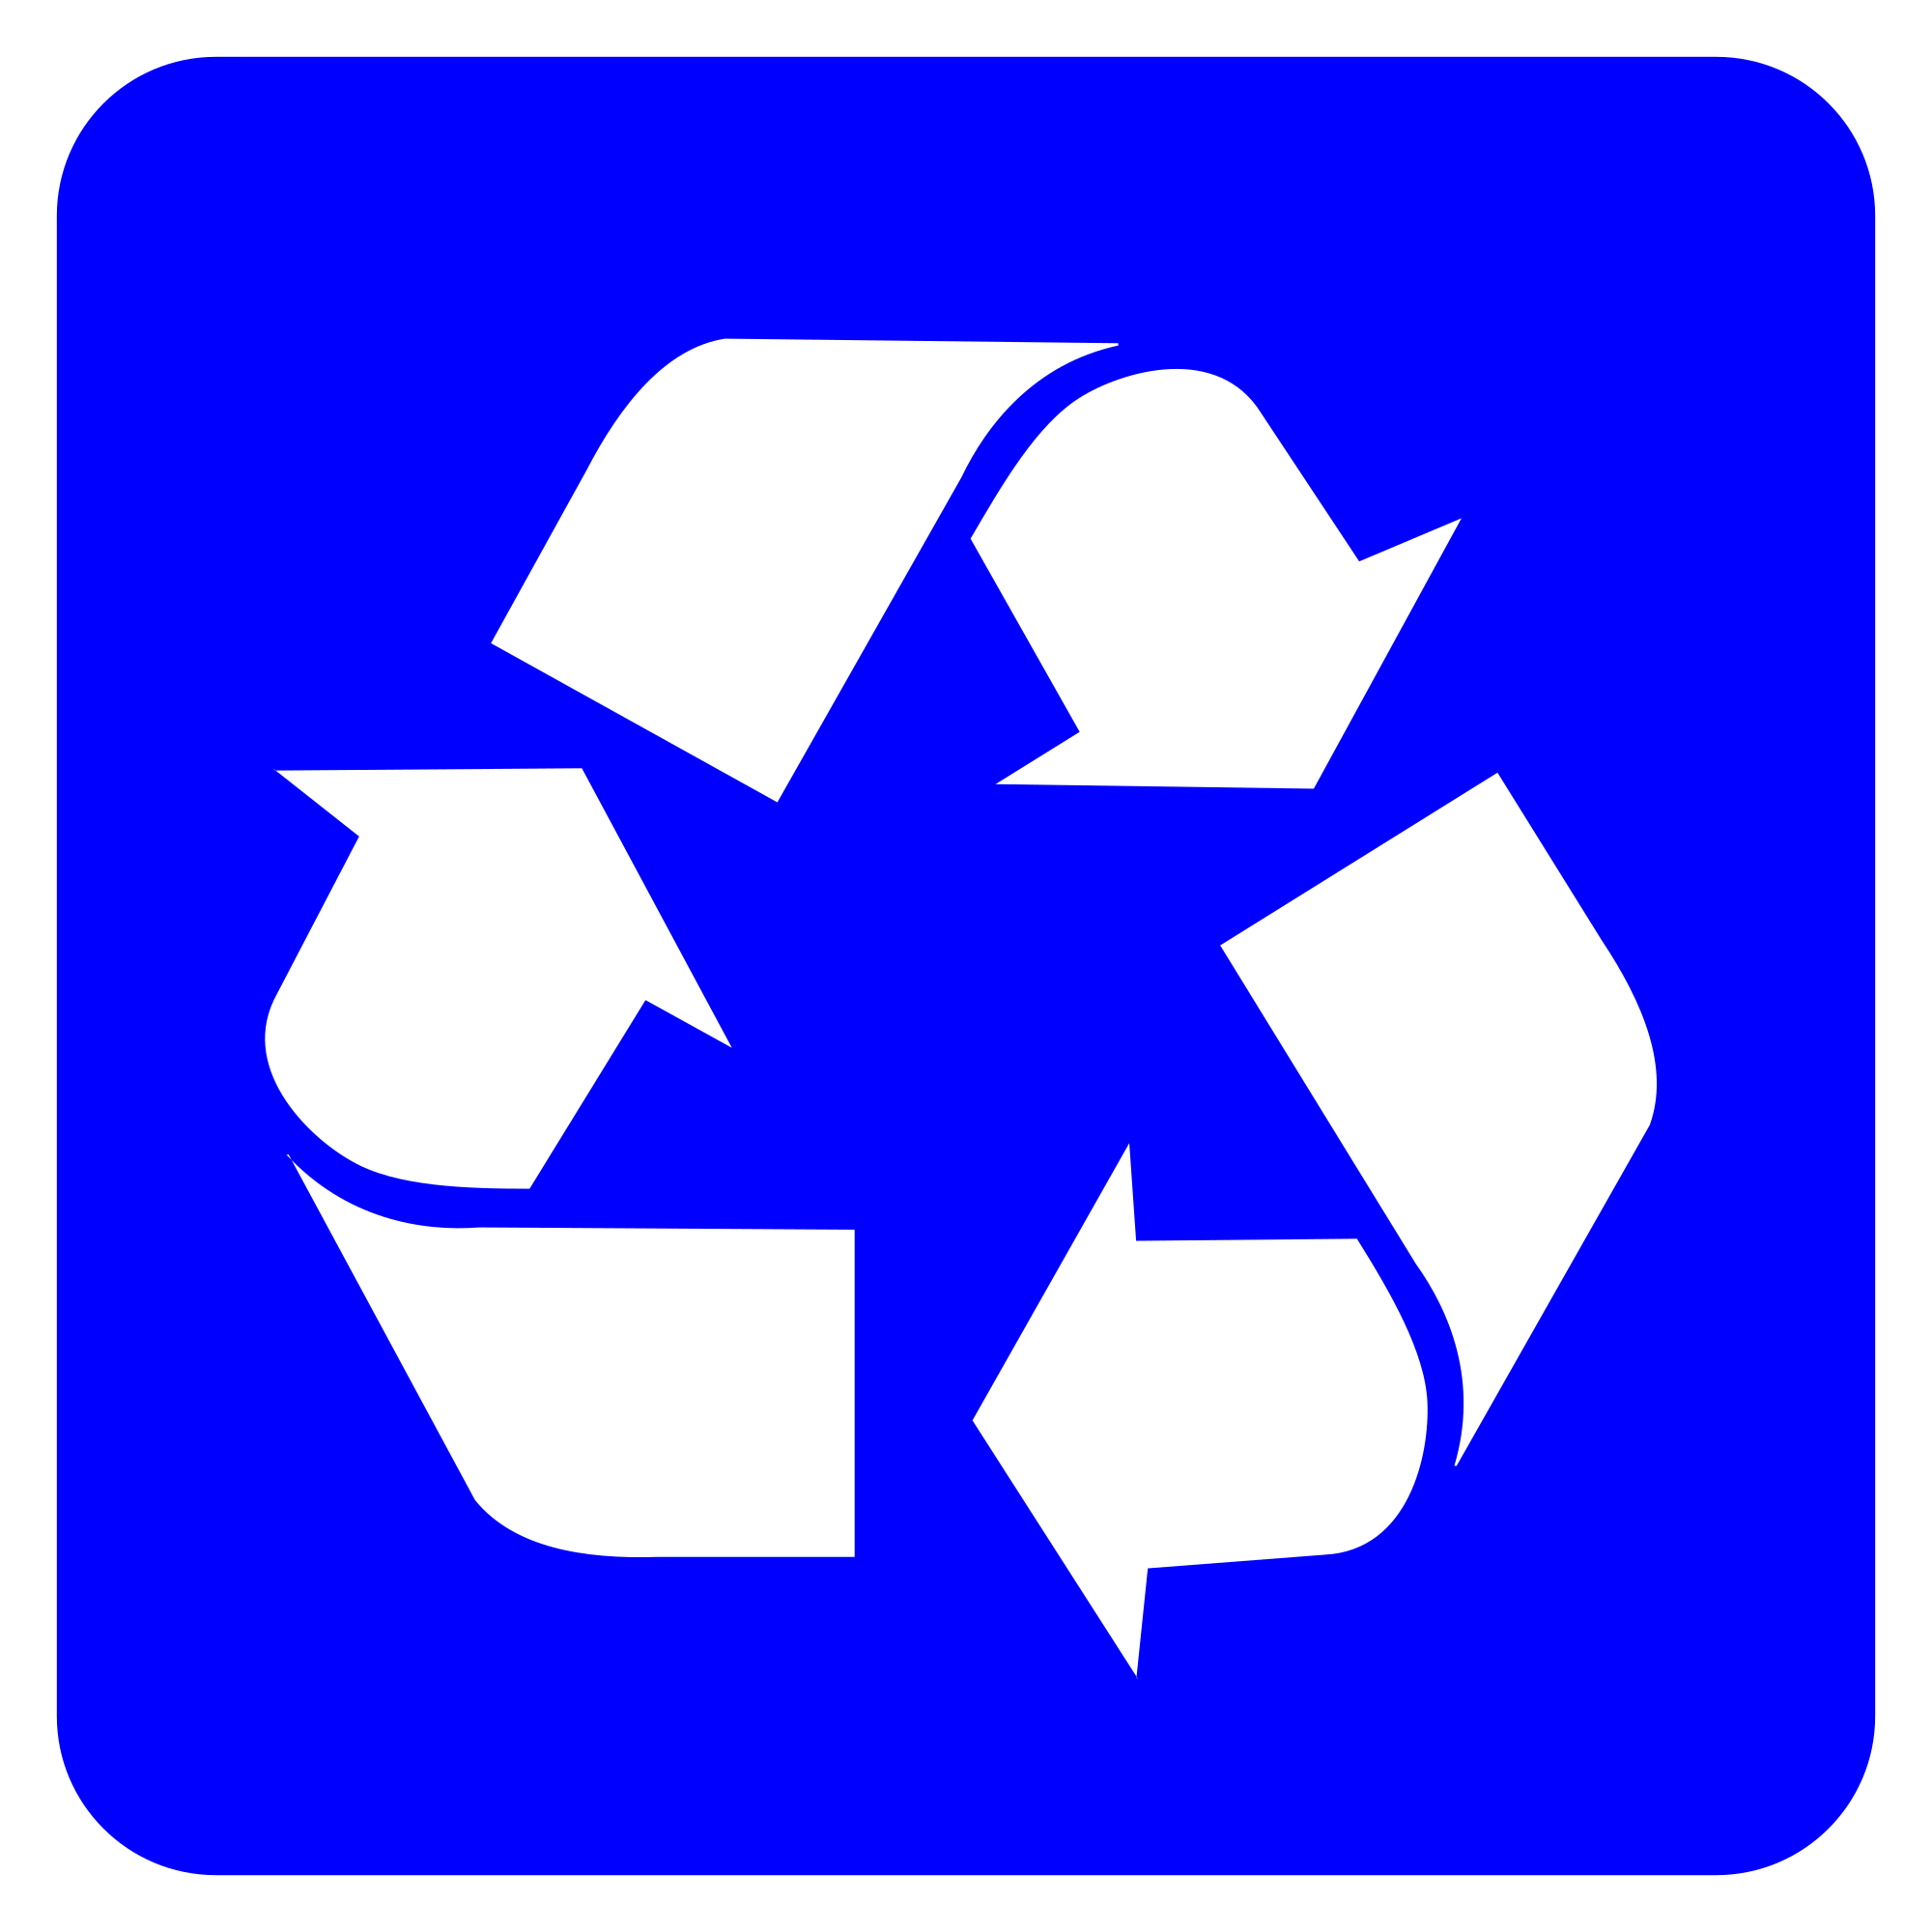 File:Recycling symbol, white on blue.svg